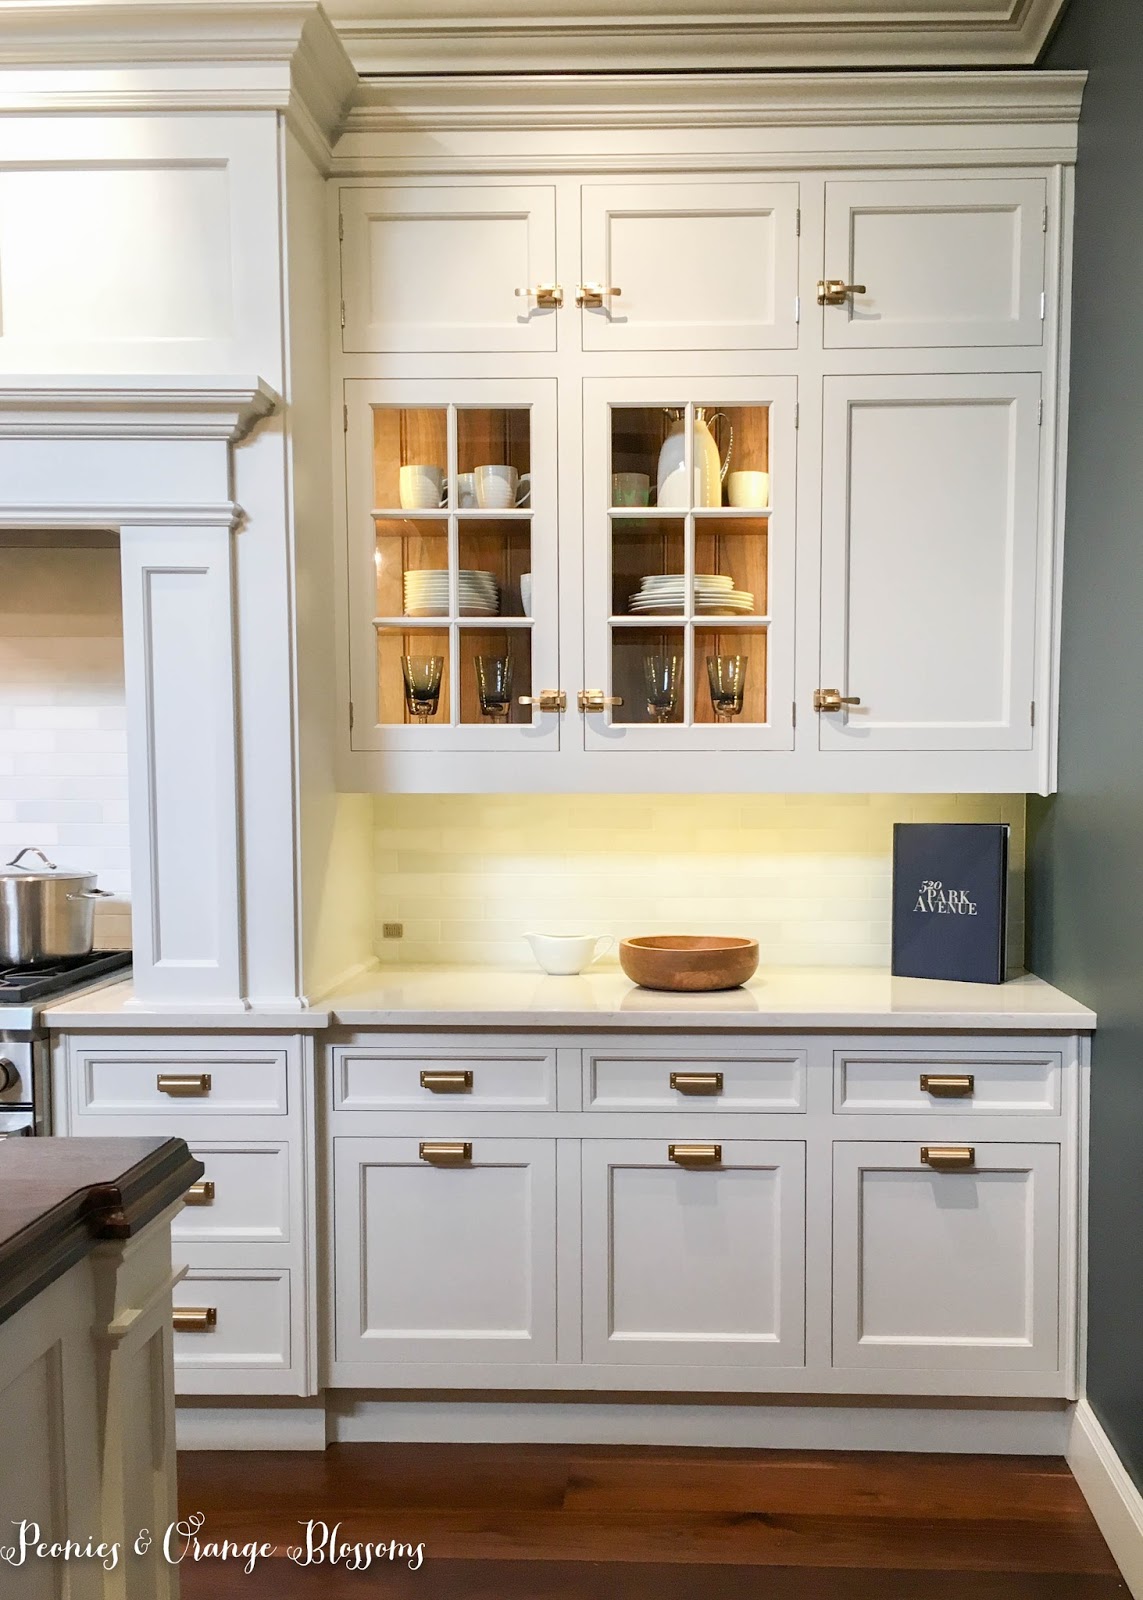 A Christopher Peacock Kitchen And Ice Box Hardware Petite Haus